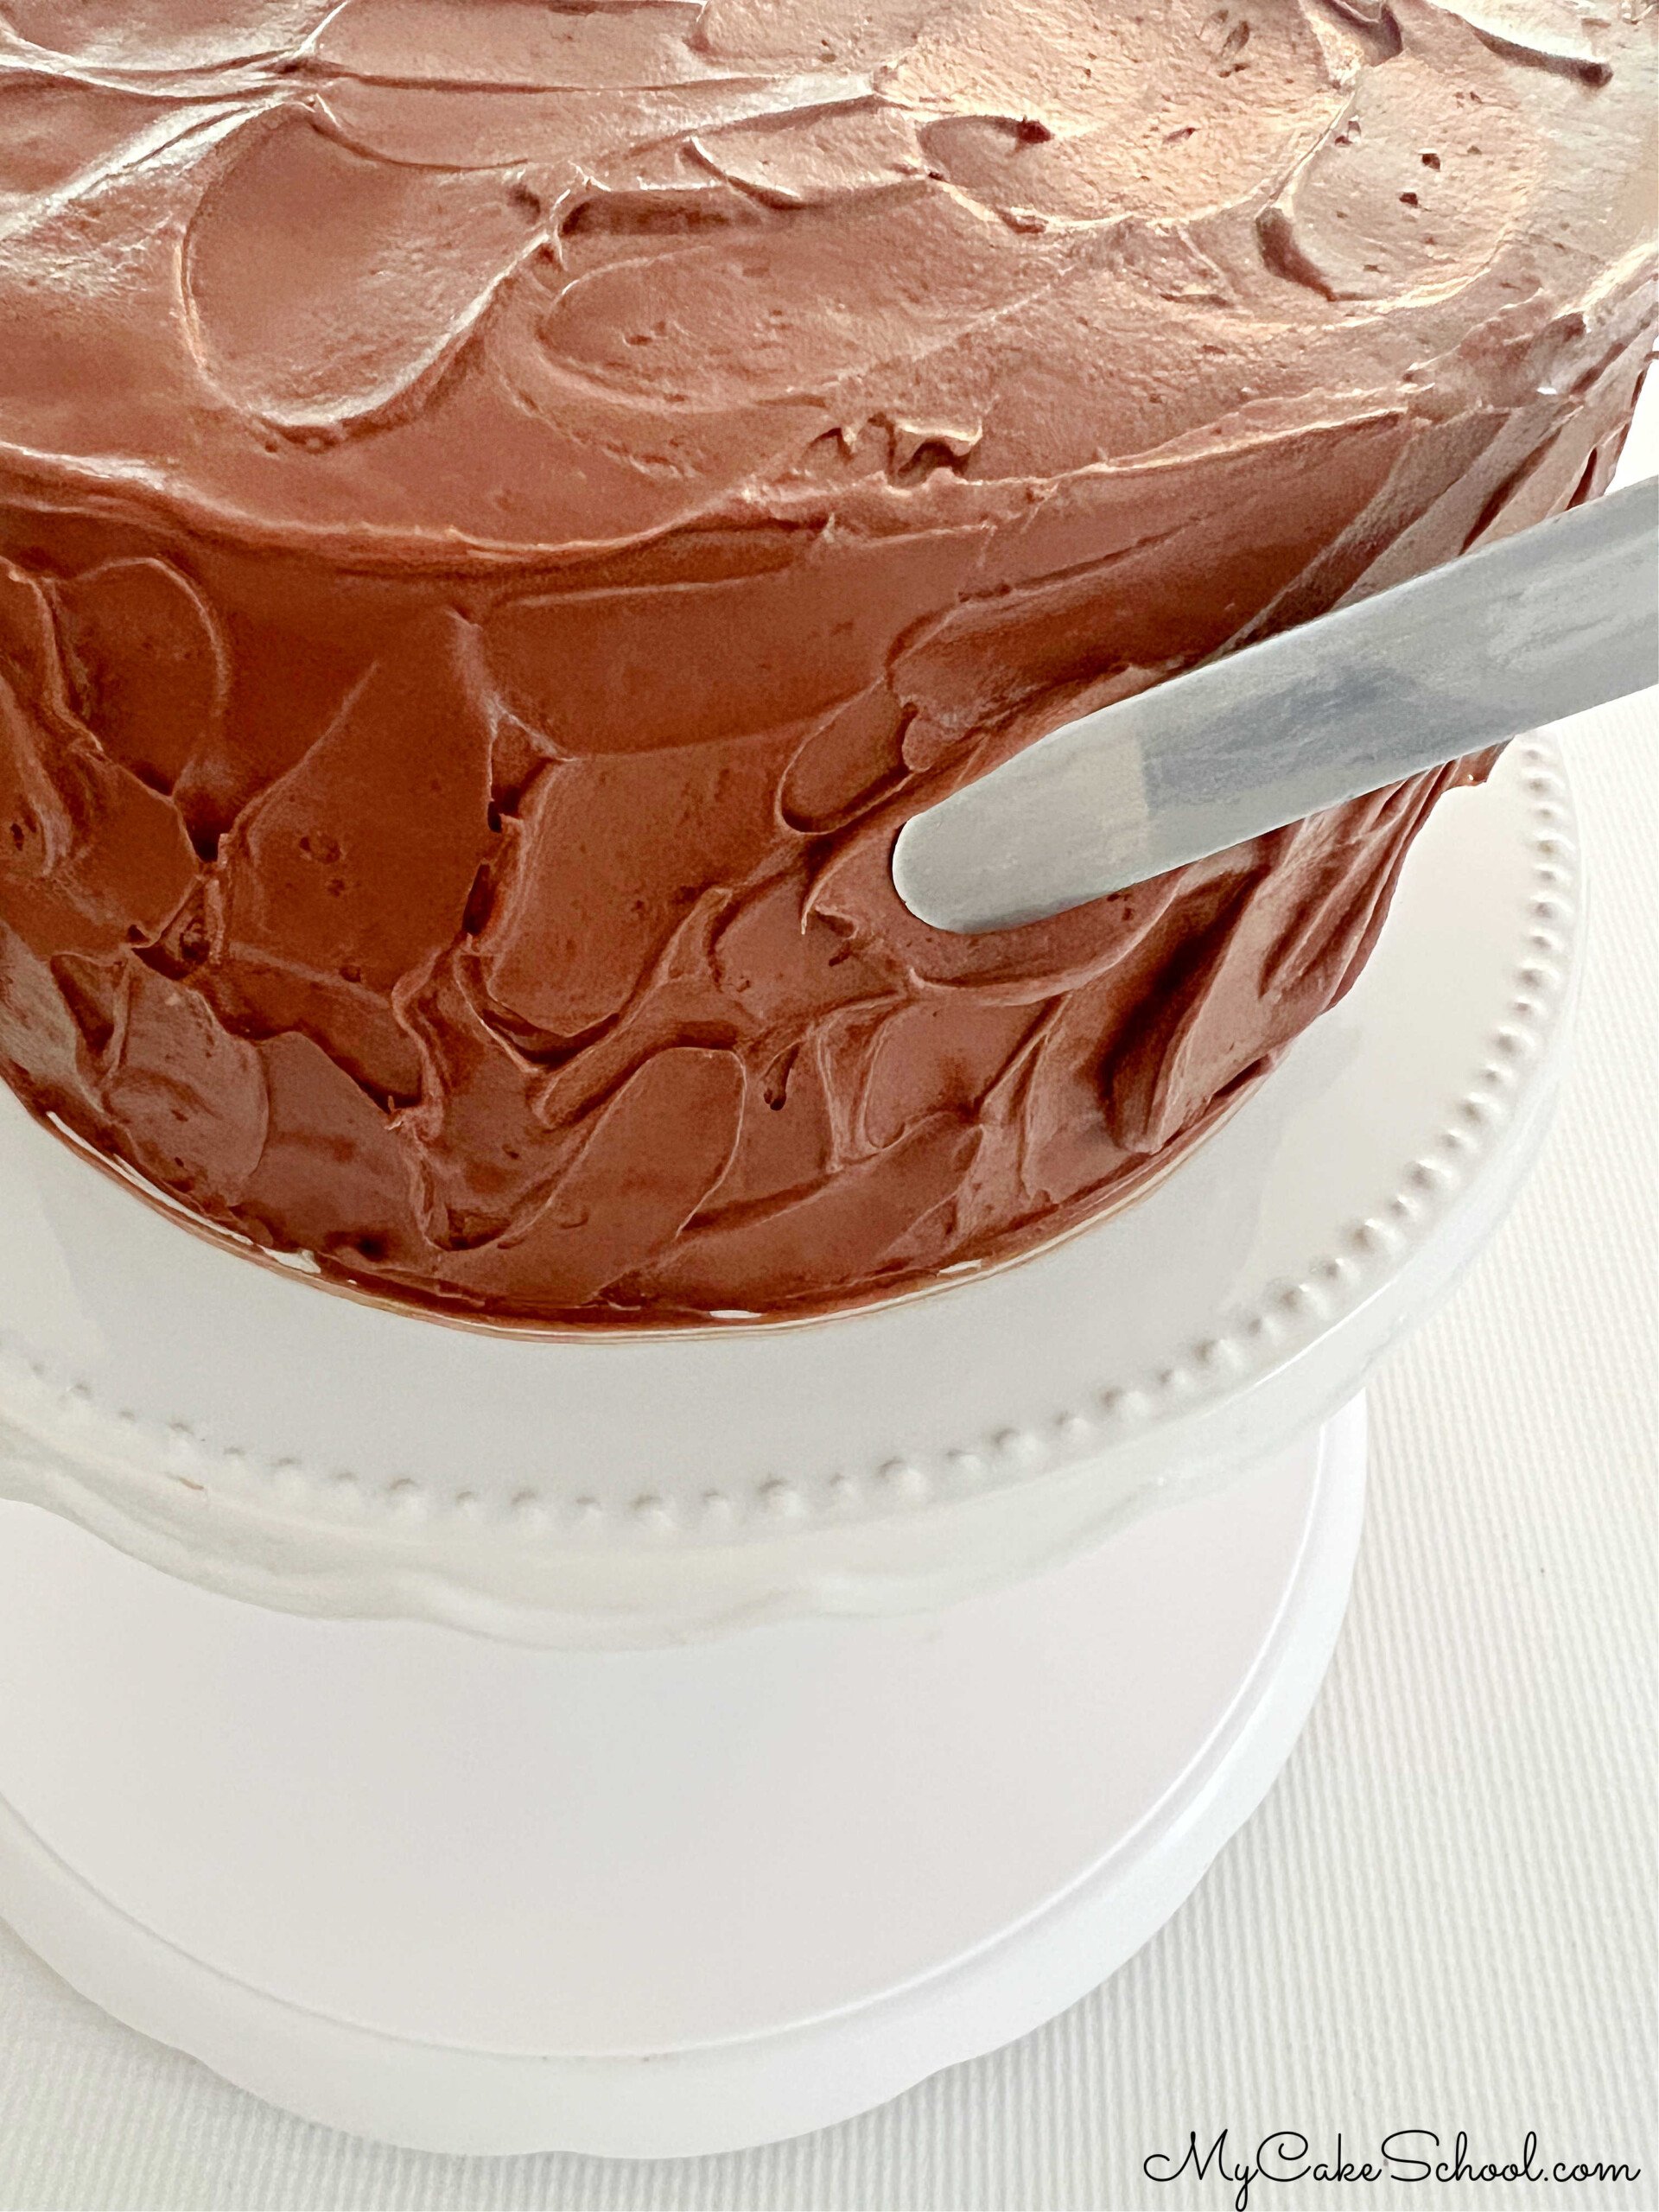 Adding texture to the frosted Chocolate Mousse Cake with an offset spatula.